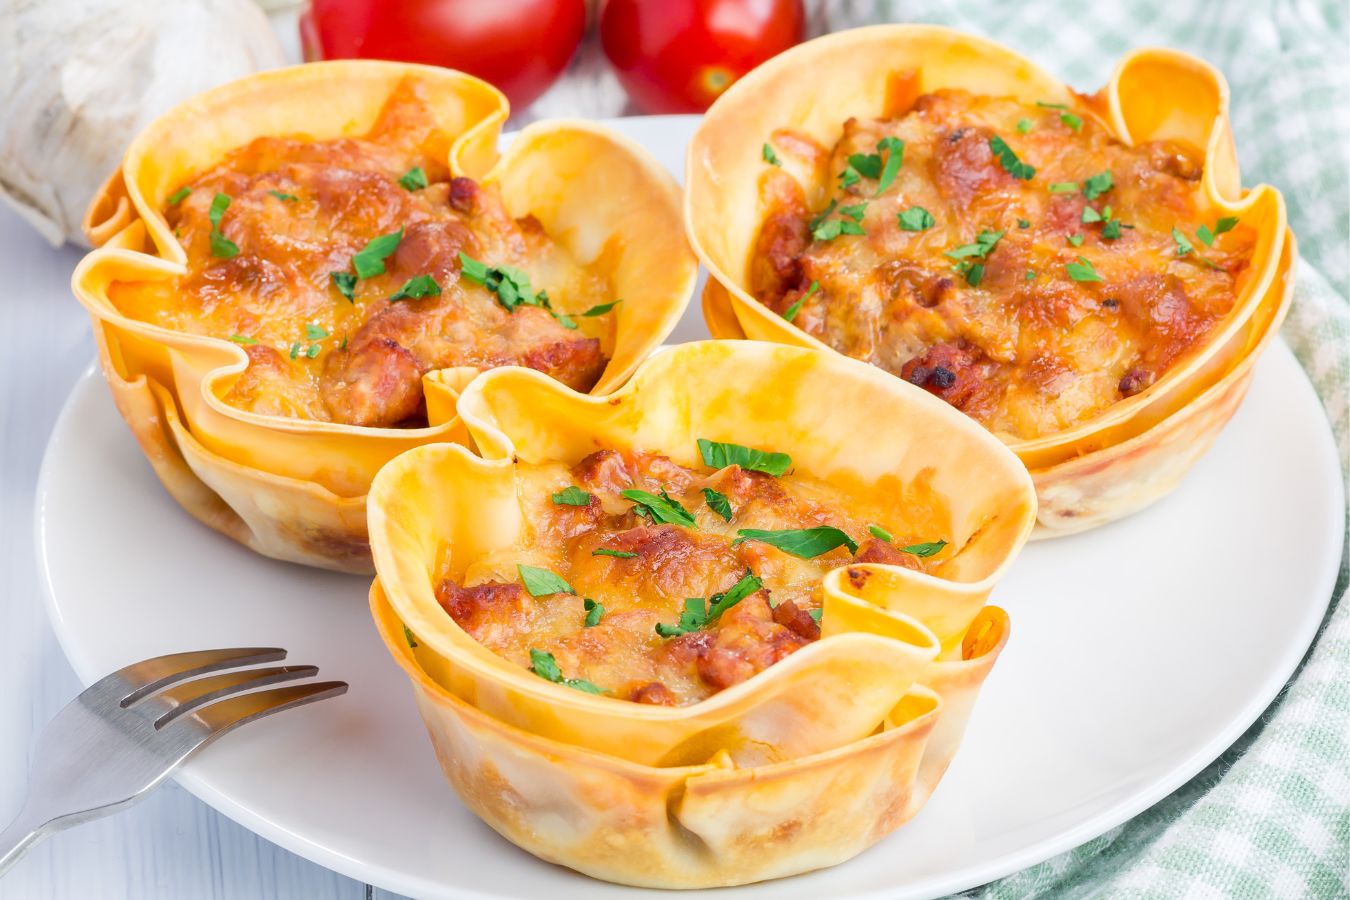 30 Meals You Can Make in a Muffin Tin